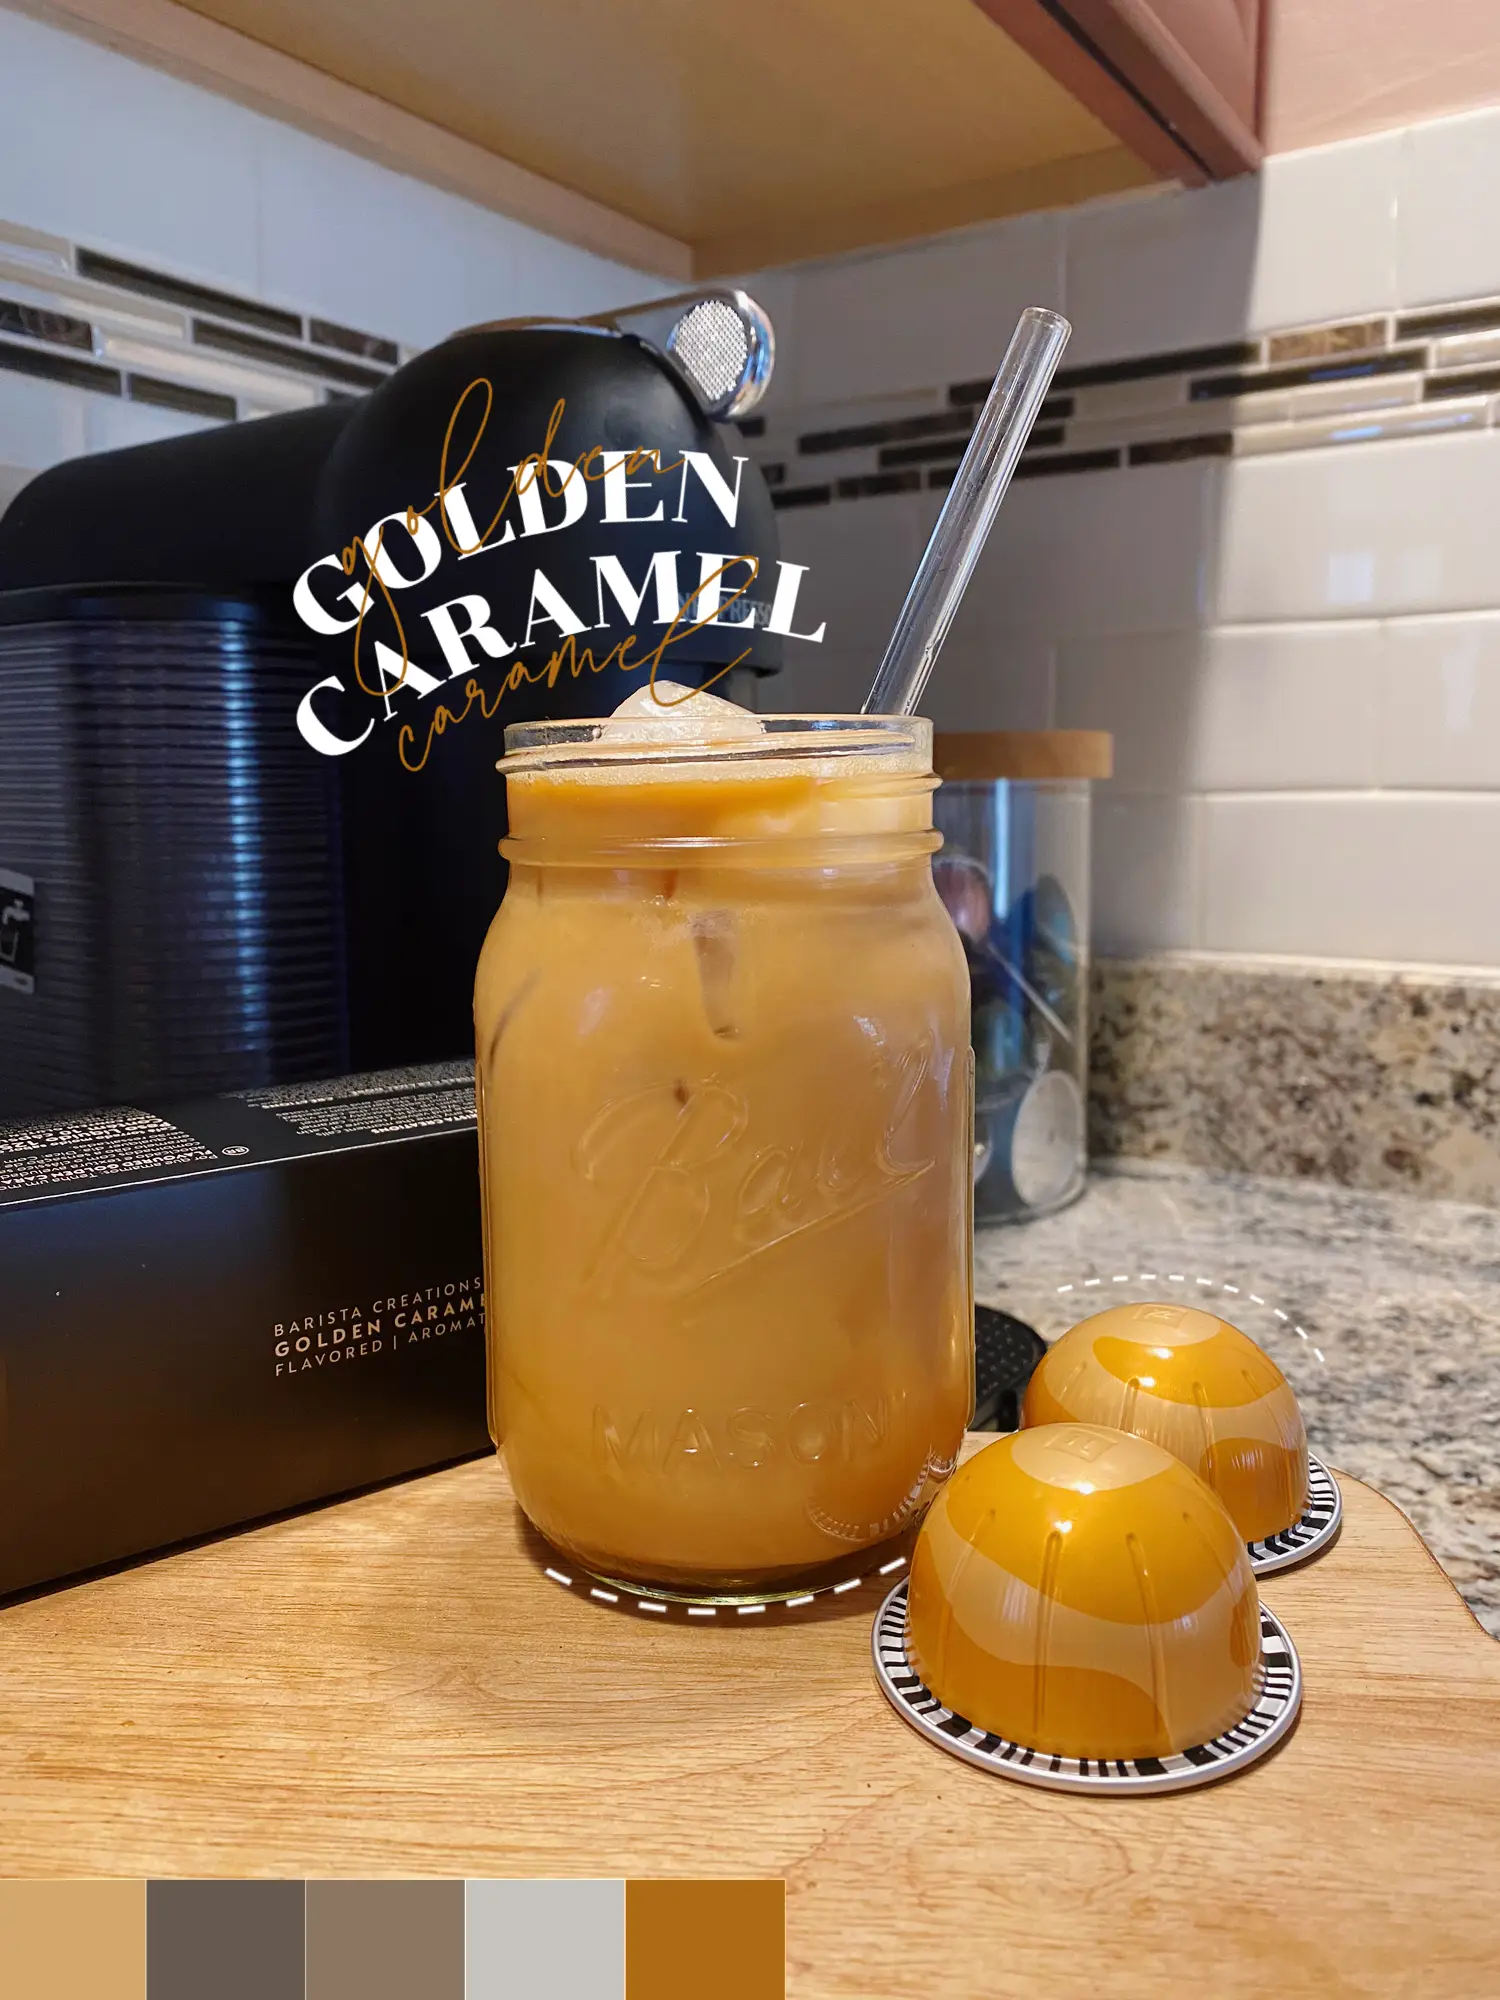 Barista Creations, Iced Coffee Pods